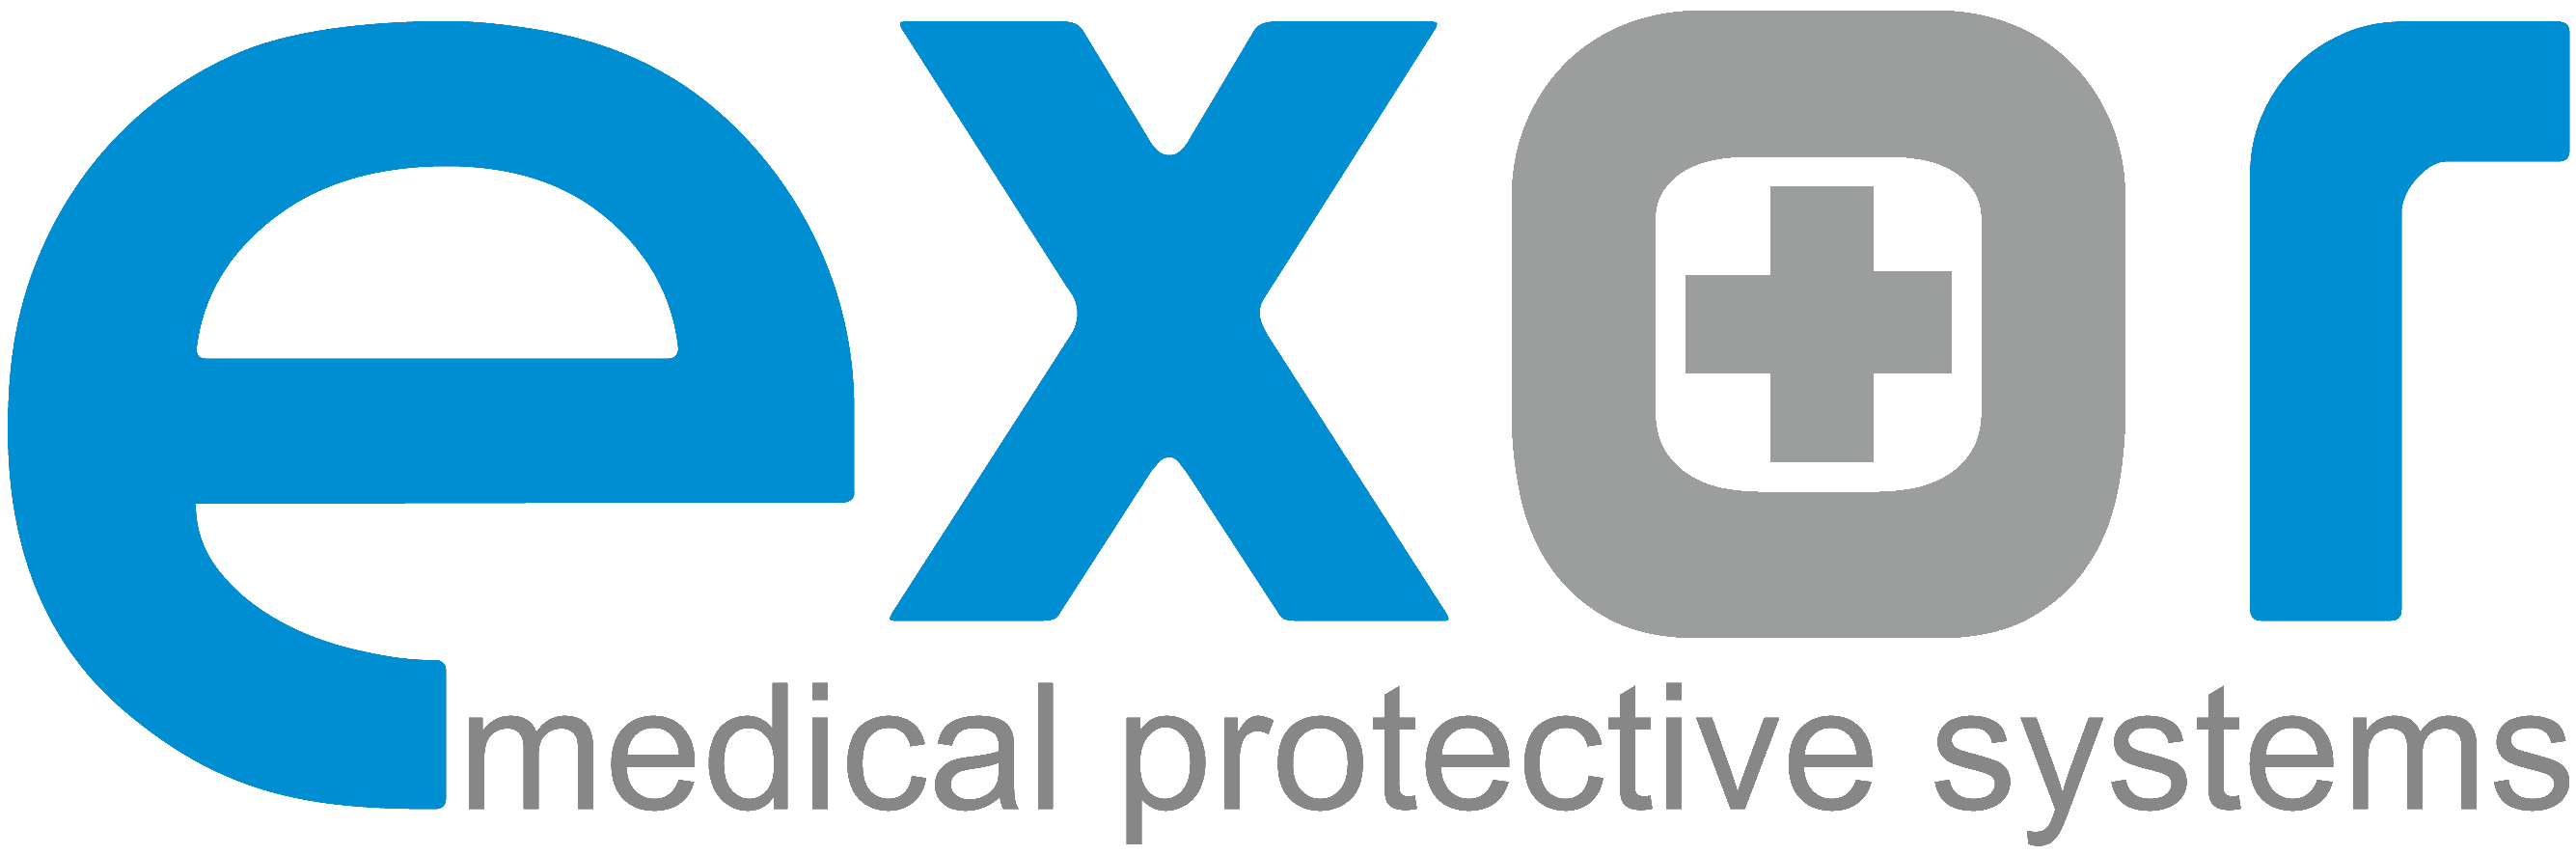 EXOR Medical Protective Systems